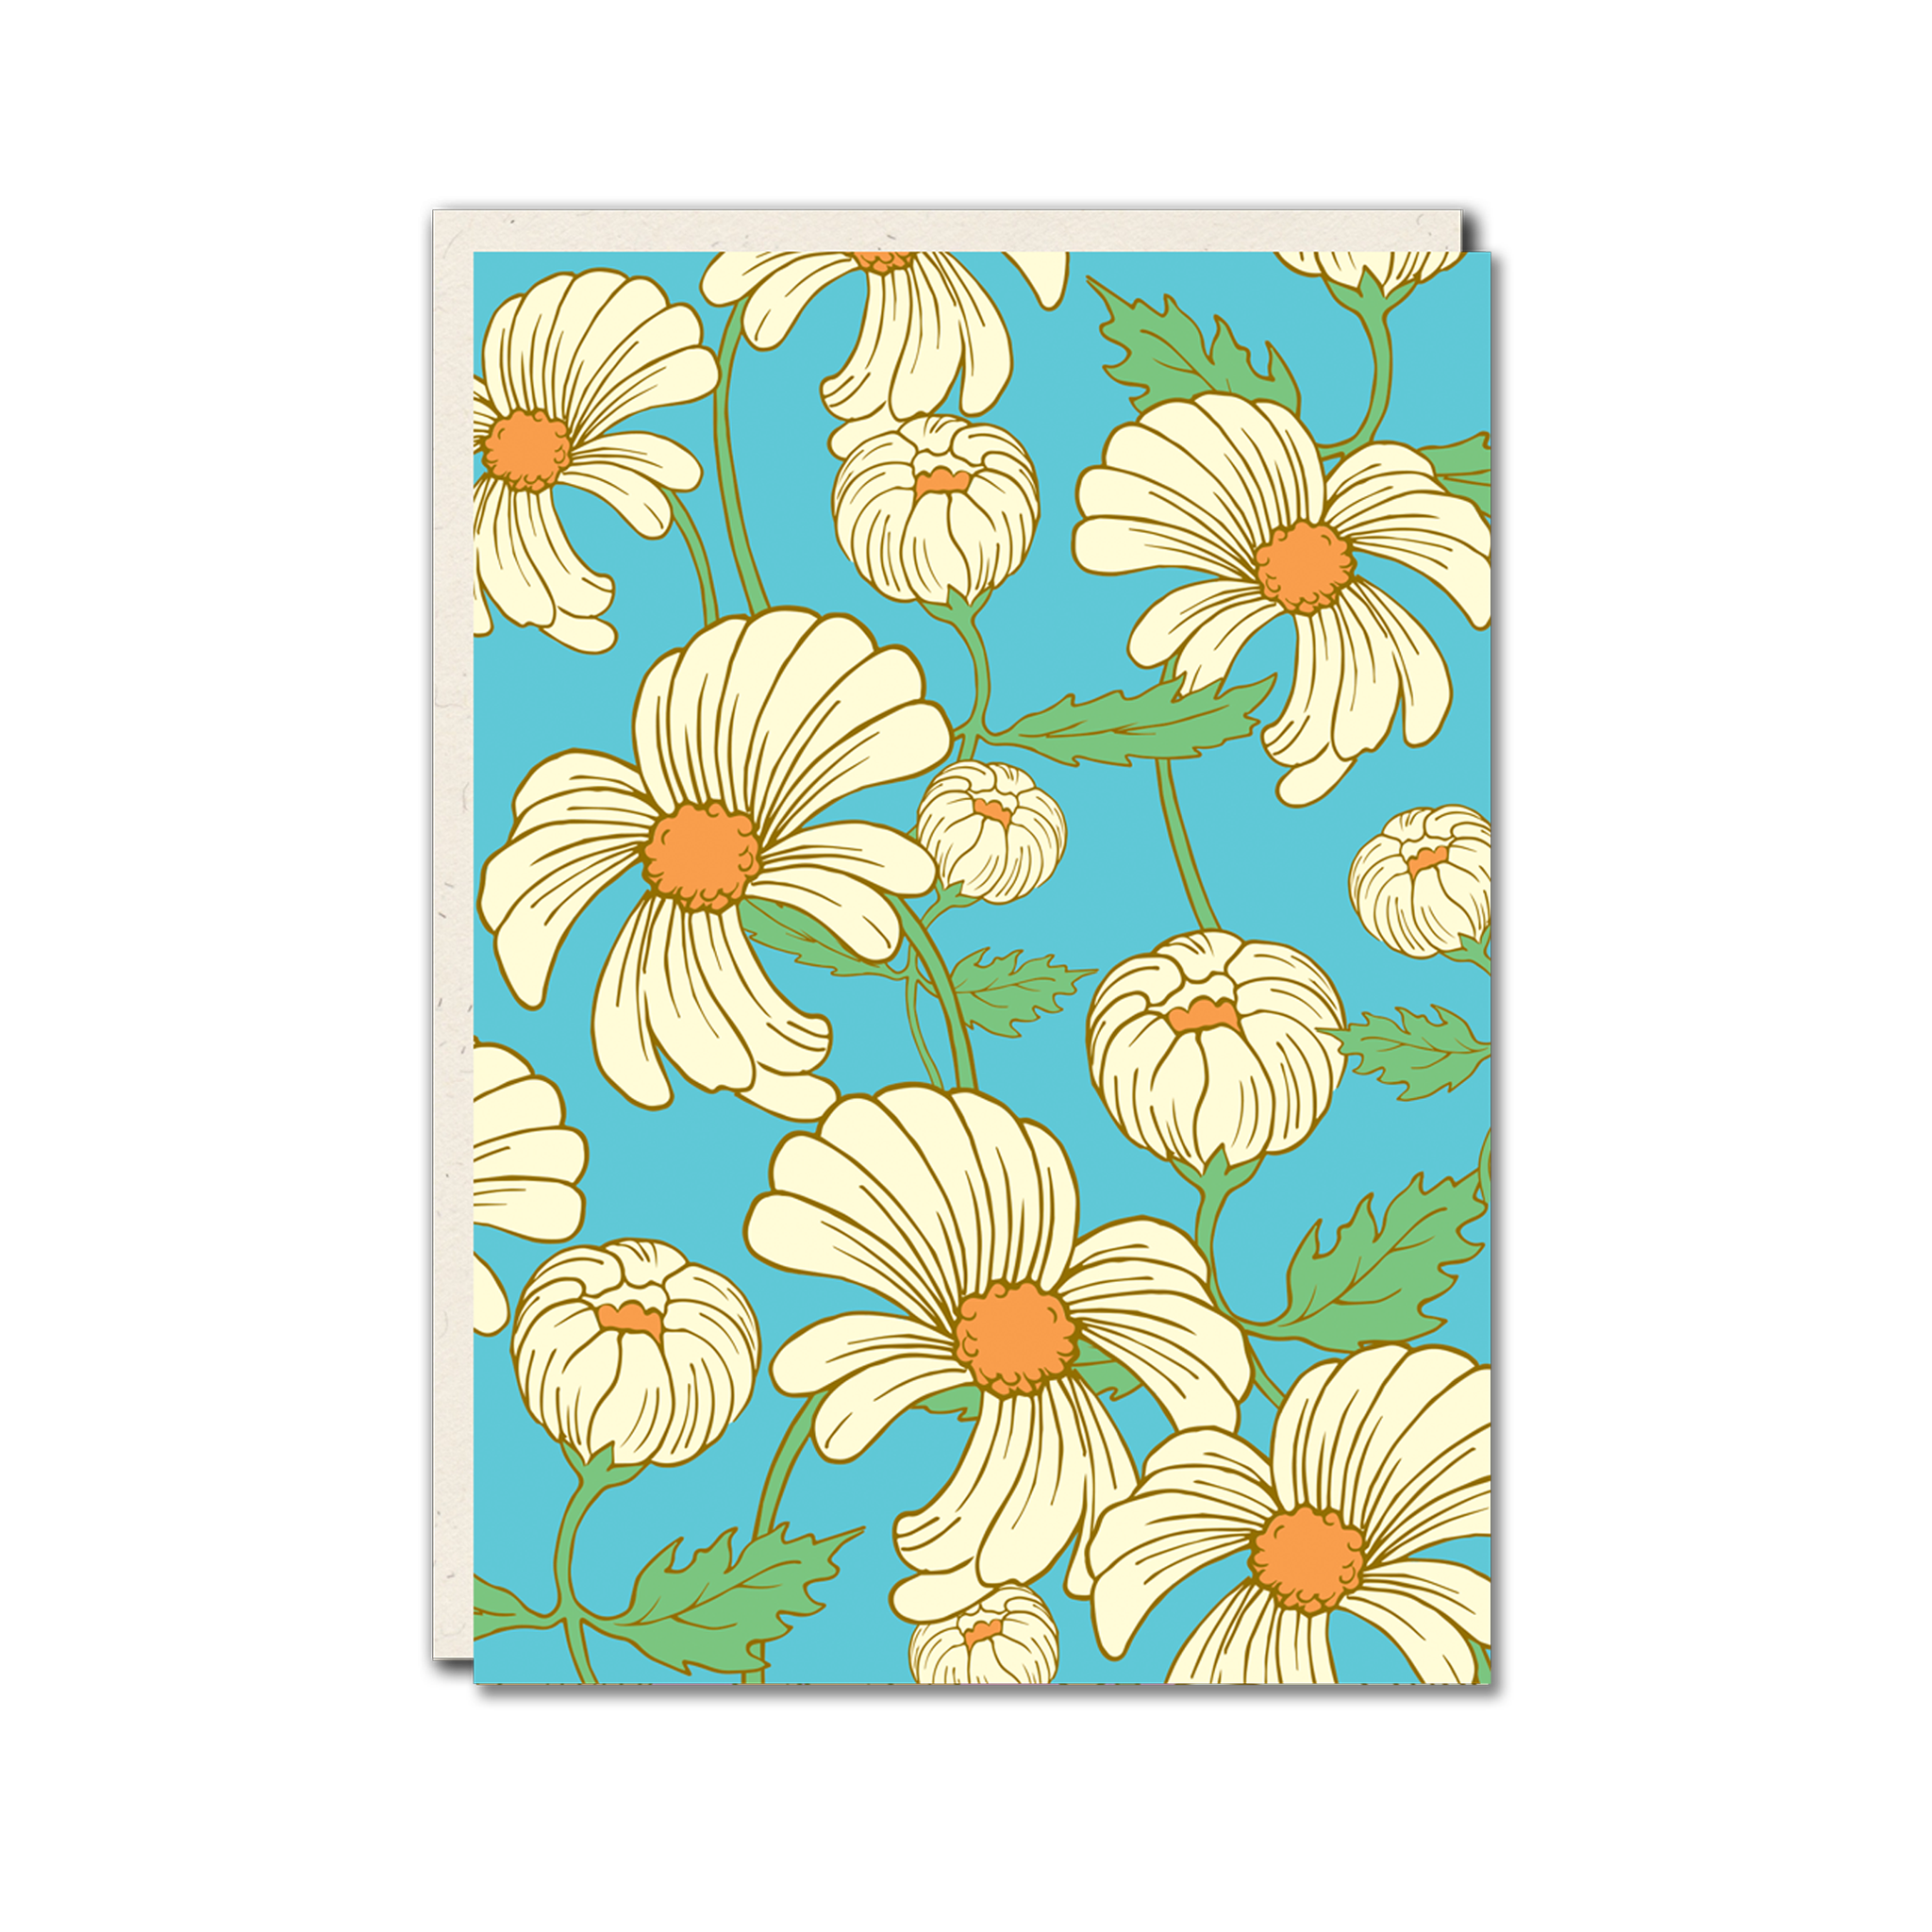 Daisy patterned greeting card